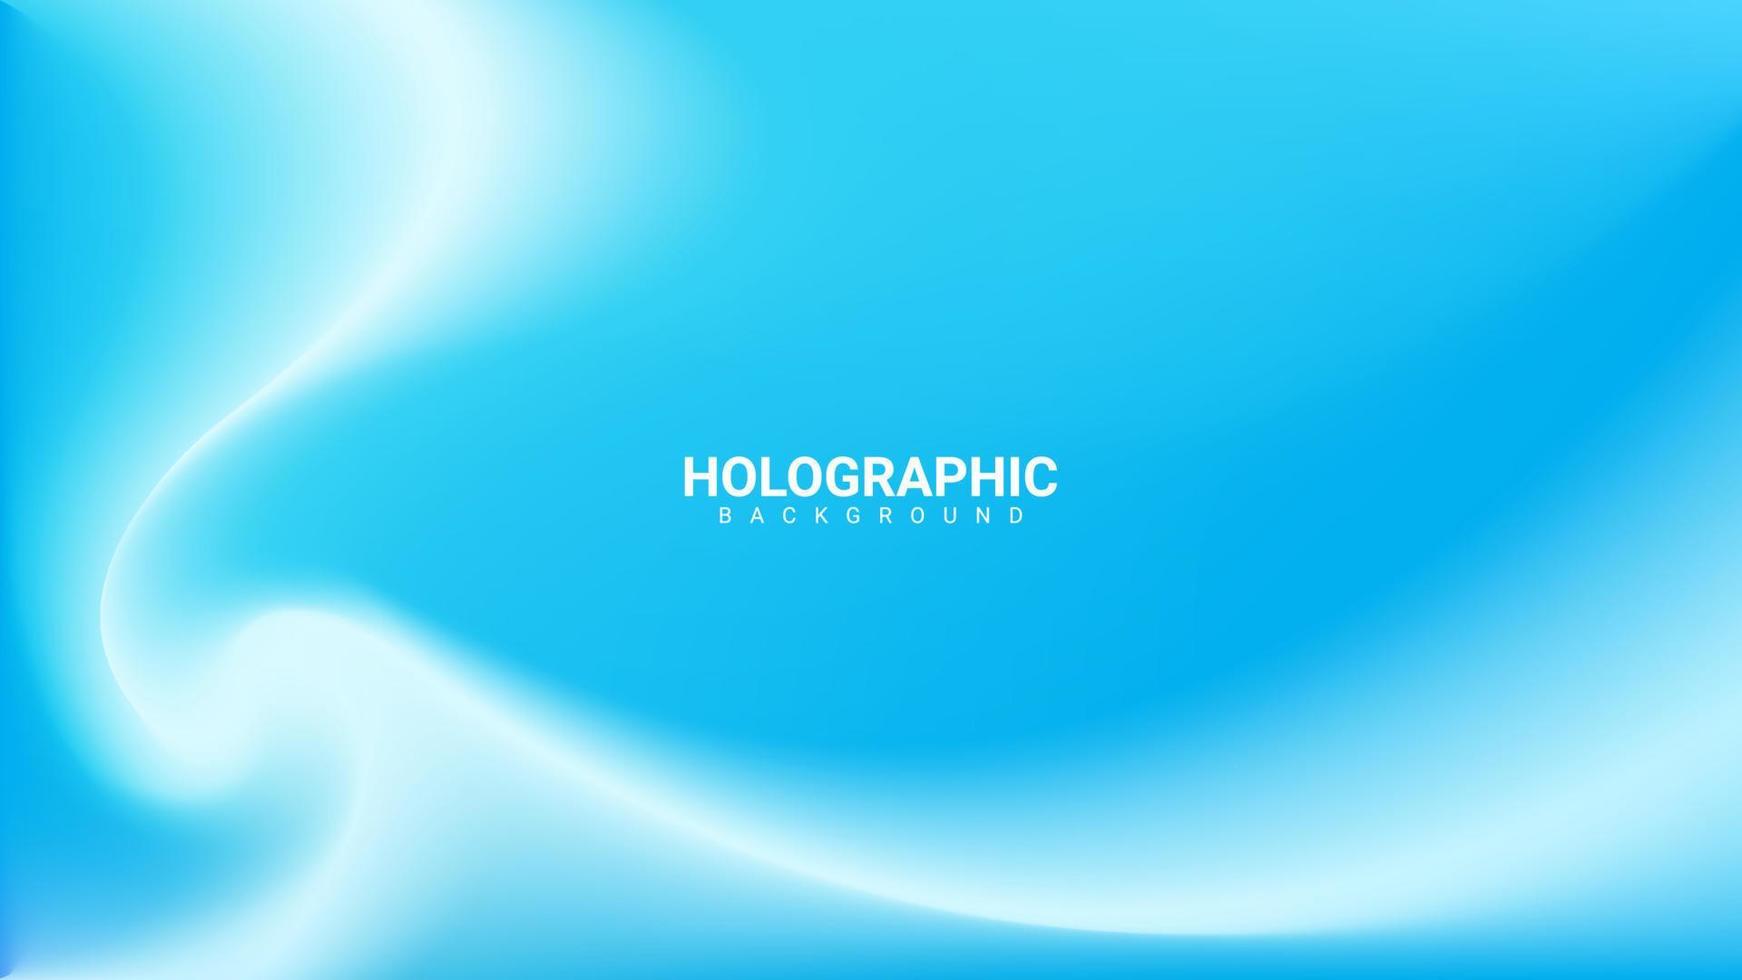 holographic background in white and light blue vector